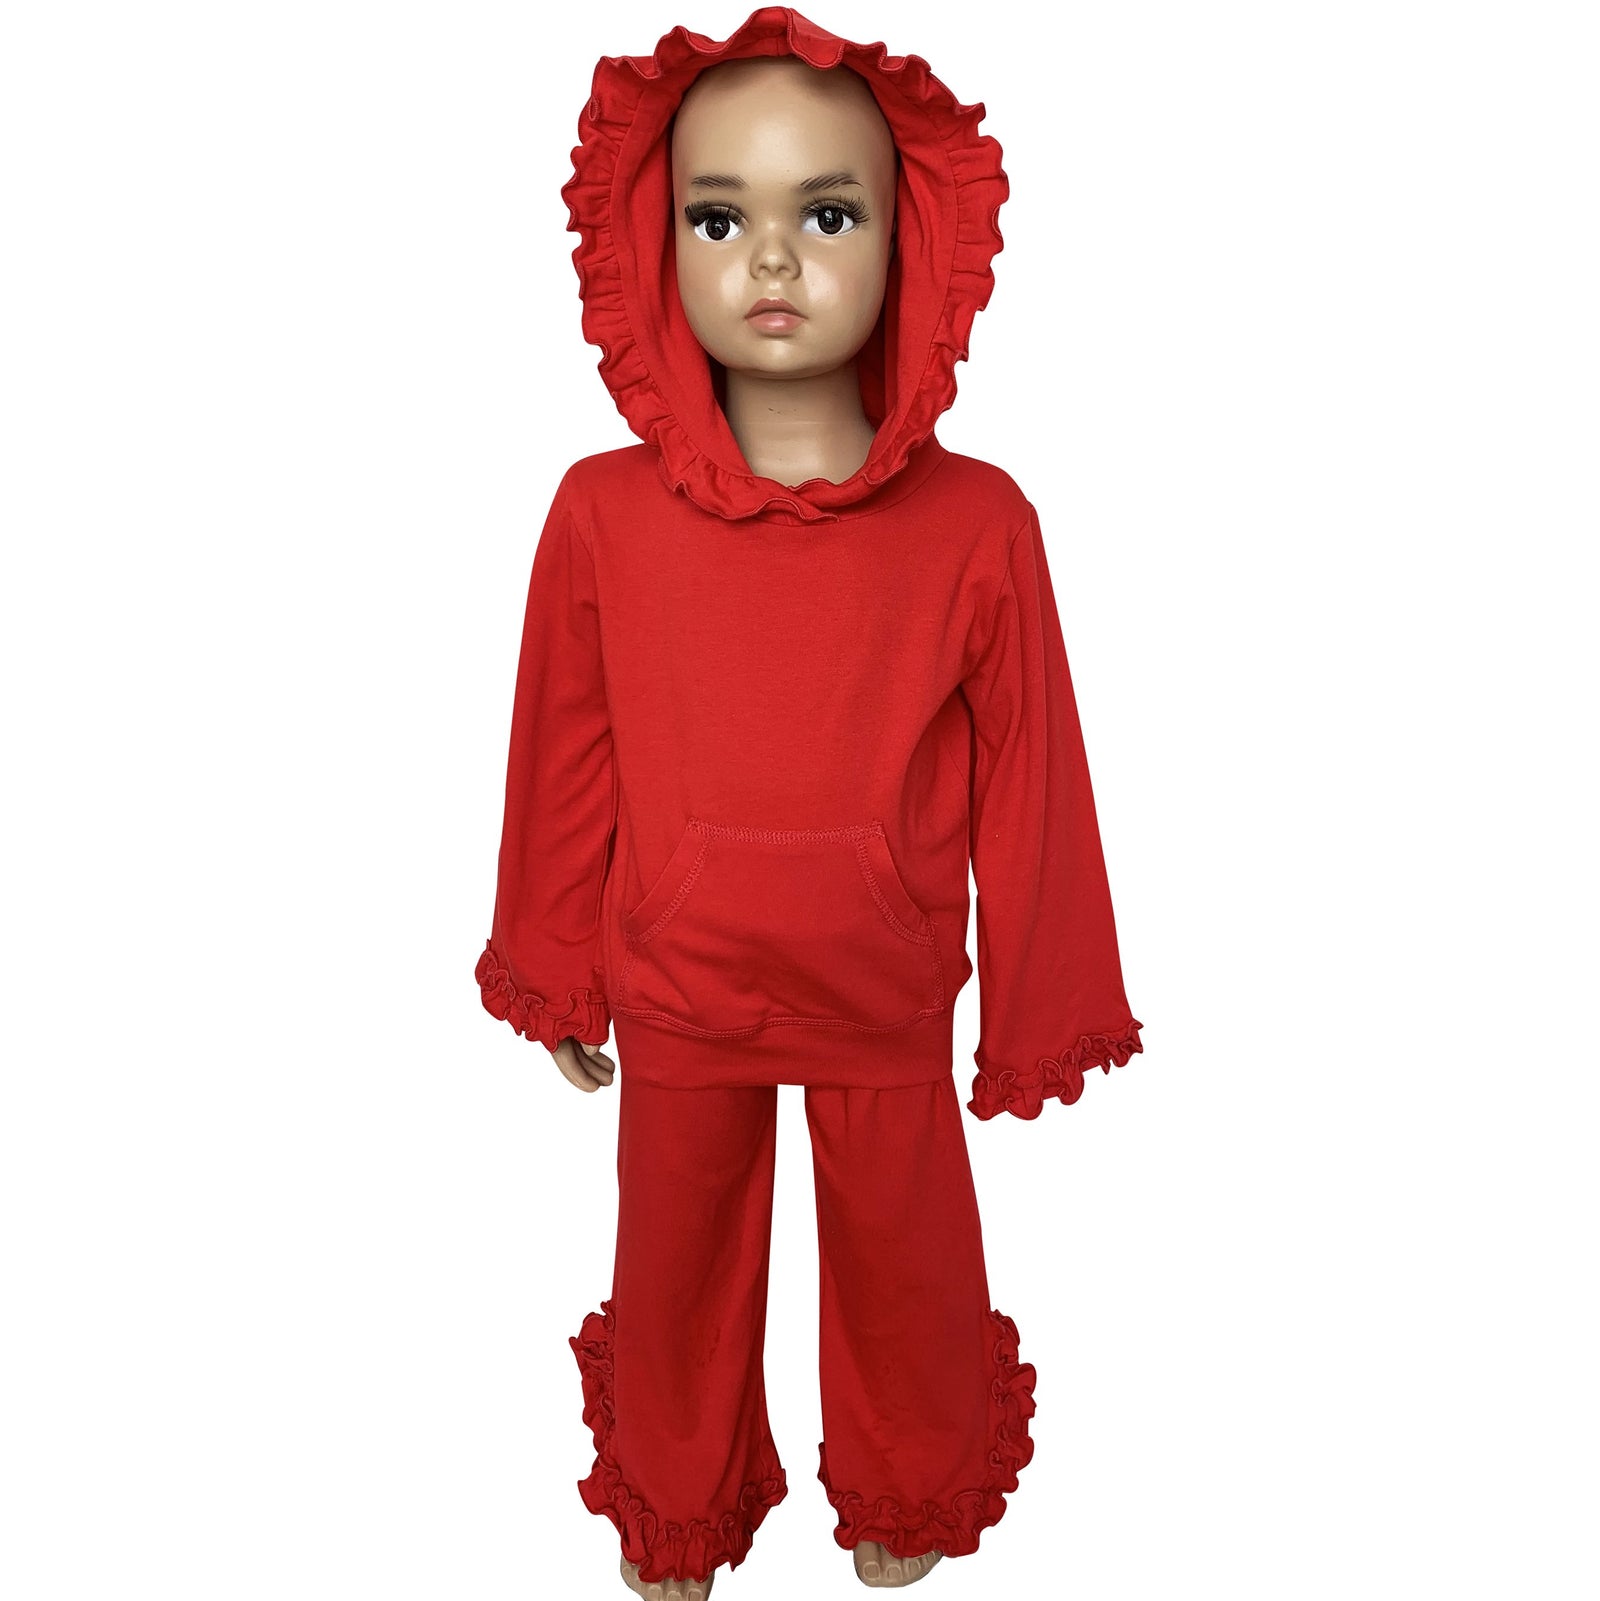 Red Ruffle Hoodie 2 Pc Fashion Track Girls Suit for Size 2/3T-9/10 by AnnLoren